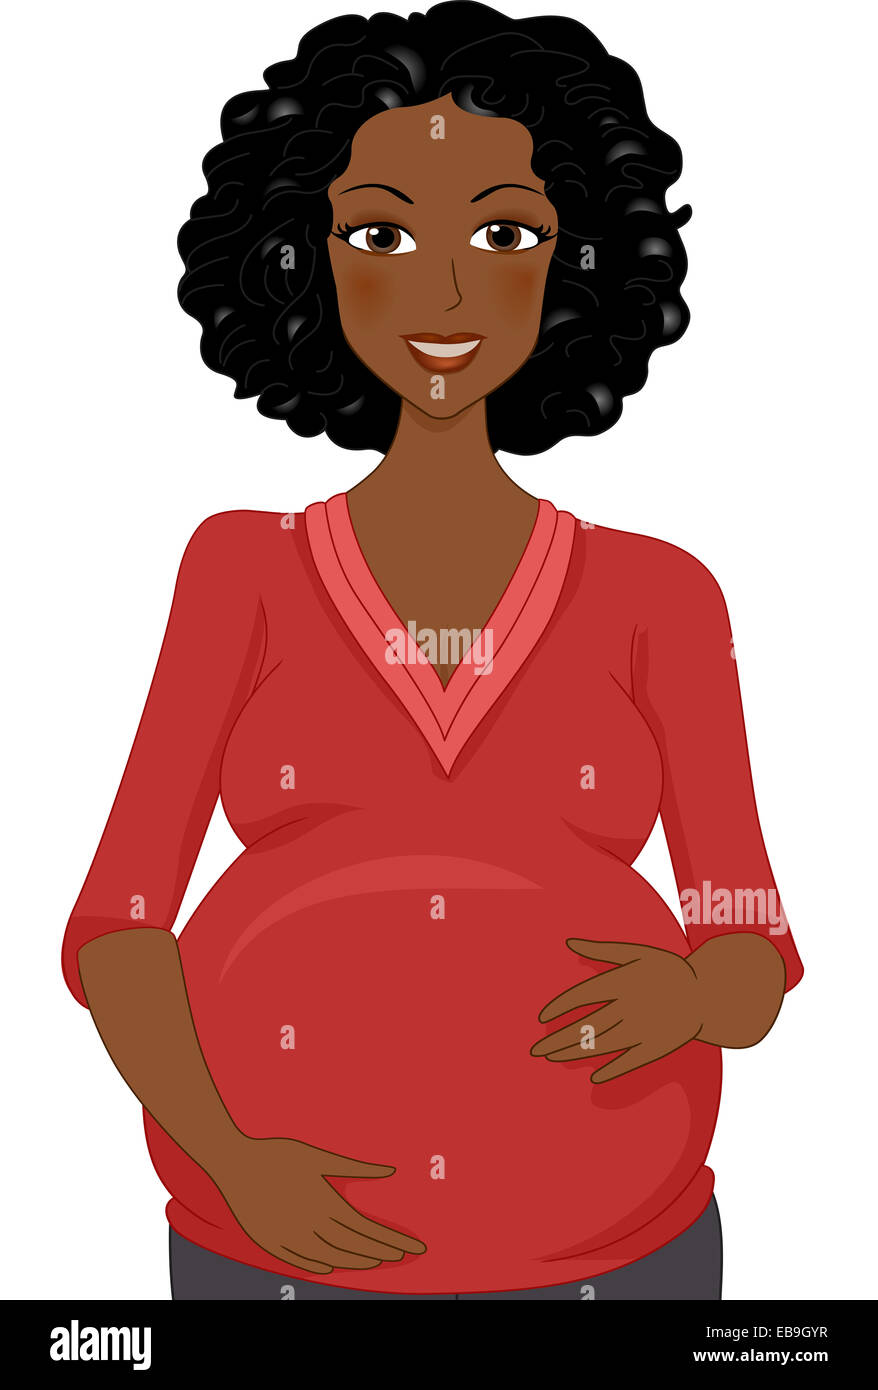 Illustration Featuring a Pregnant African Woman Stock Photo